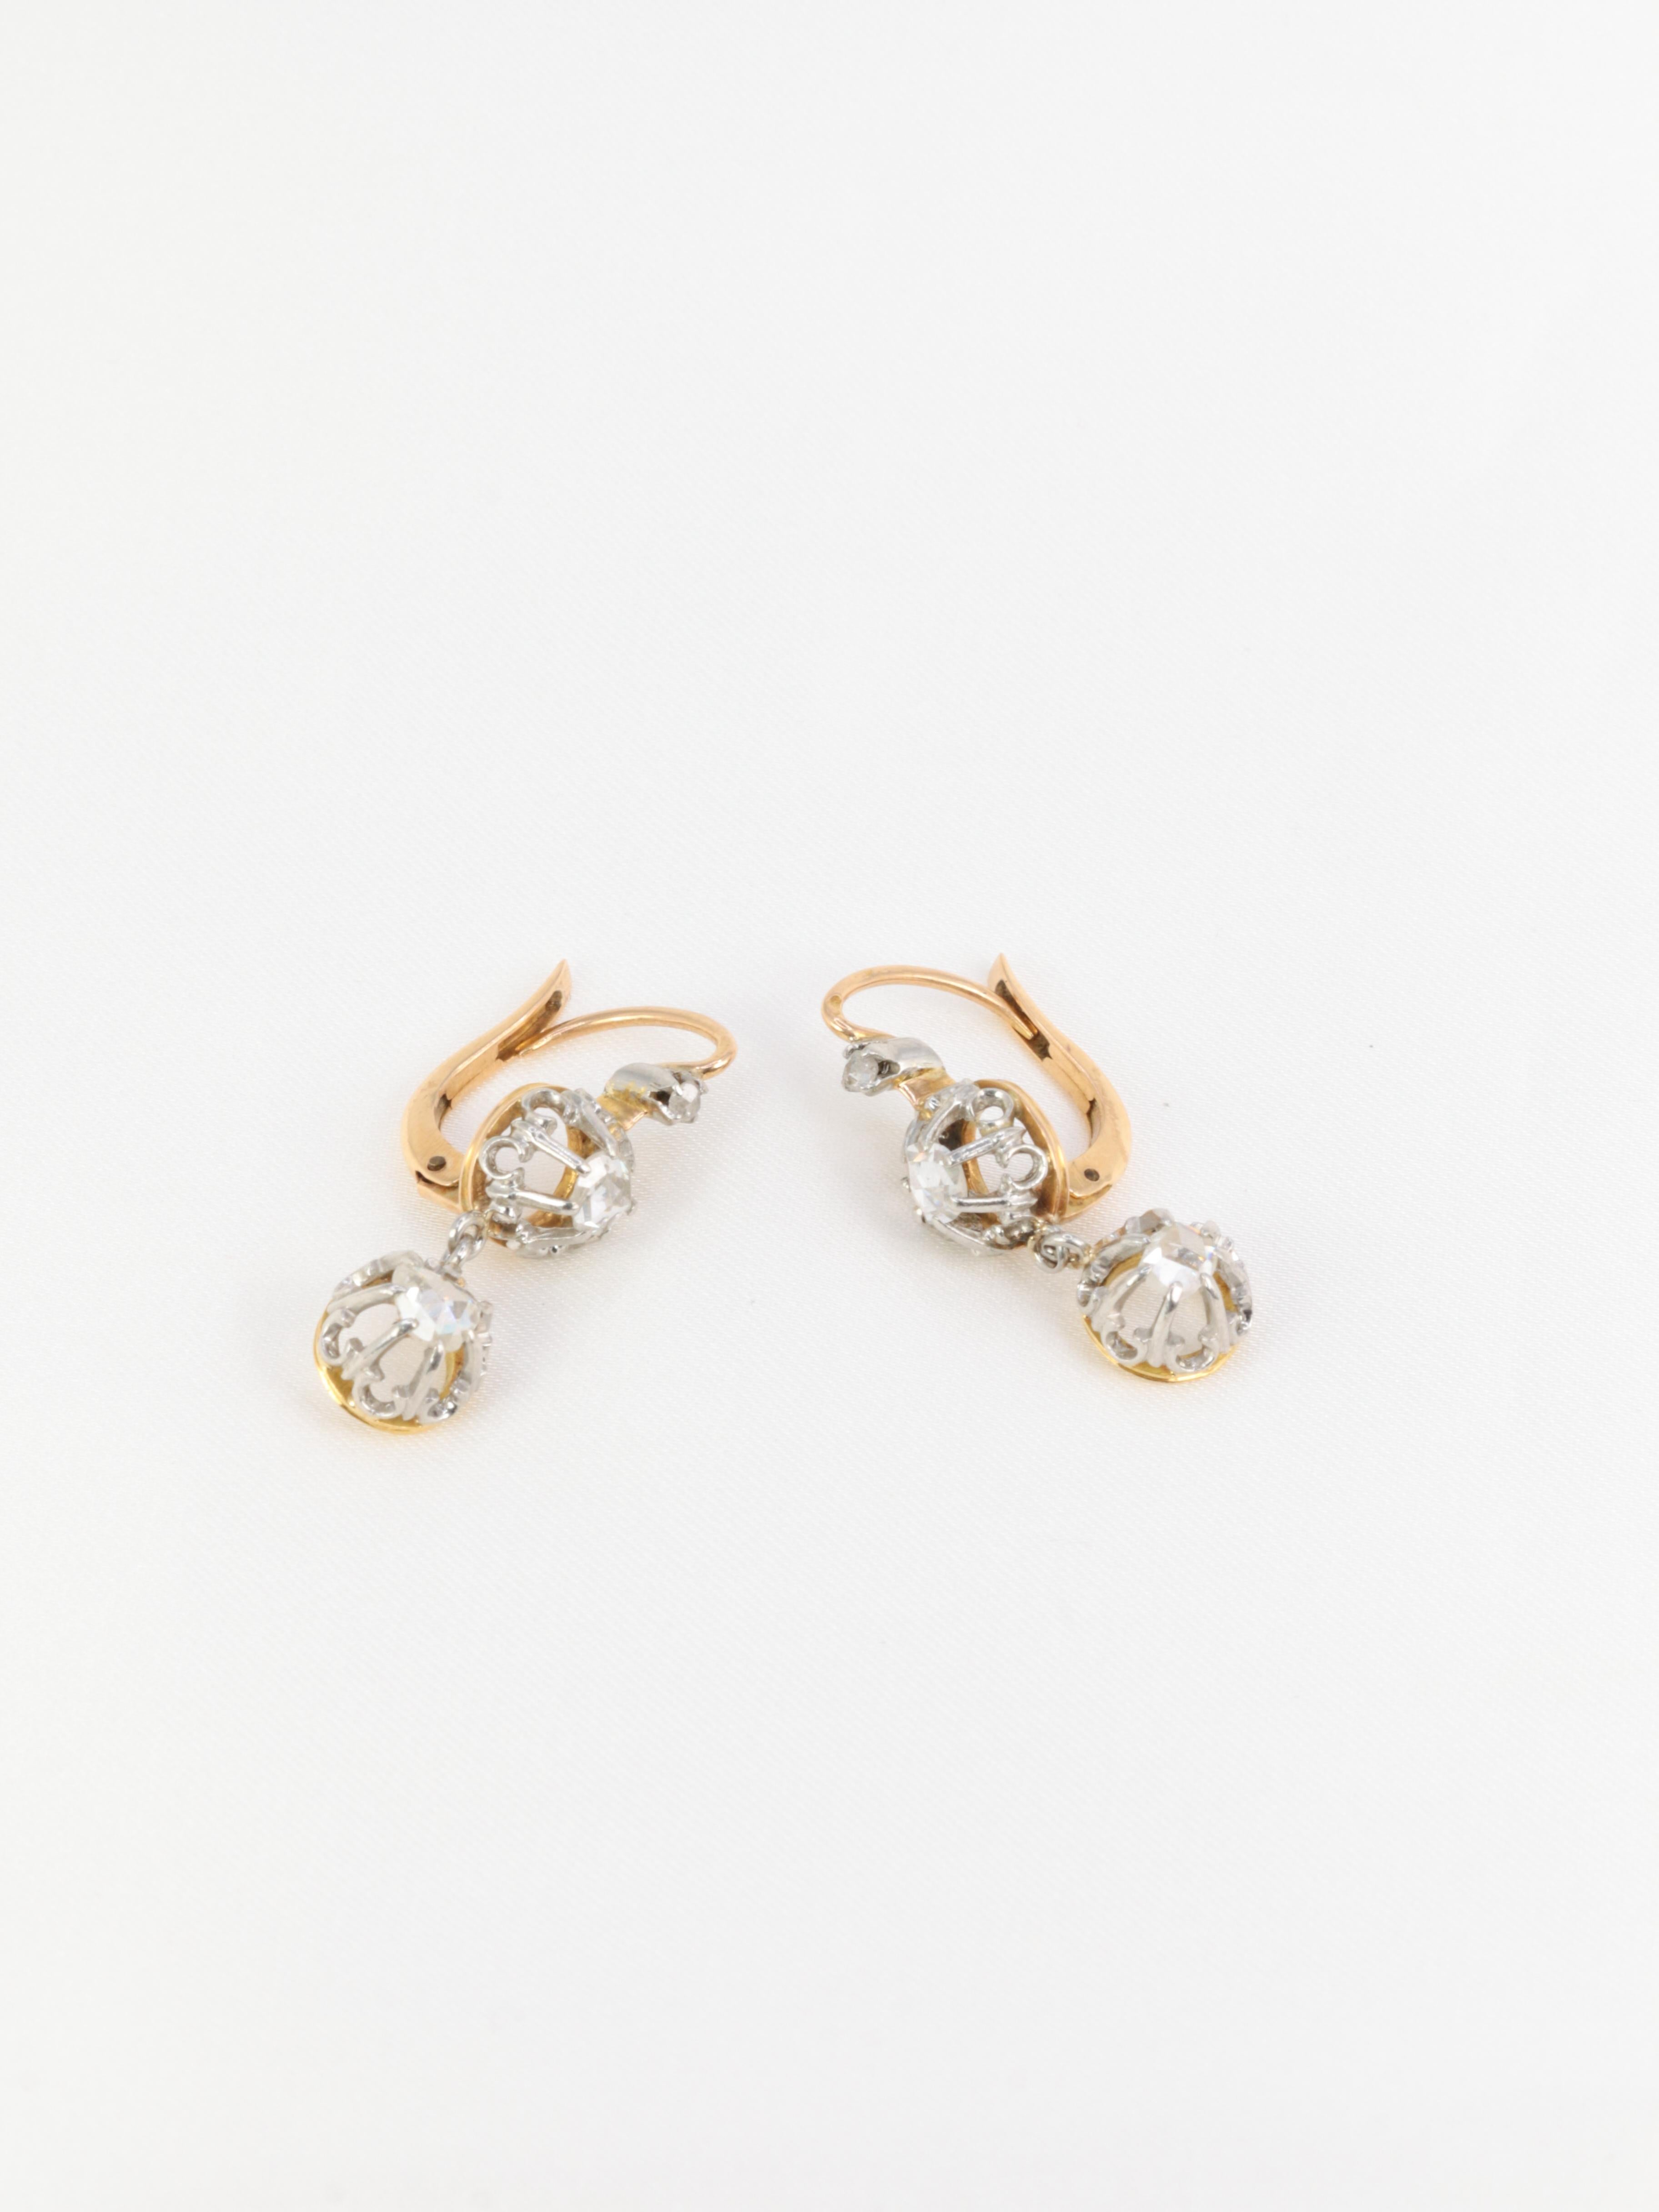 Victorian Antique dormeuse earrings in yellow gold and rose-cut diamonds For Sale